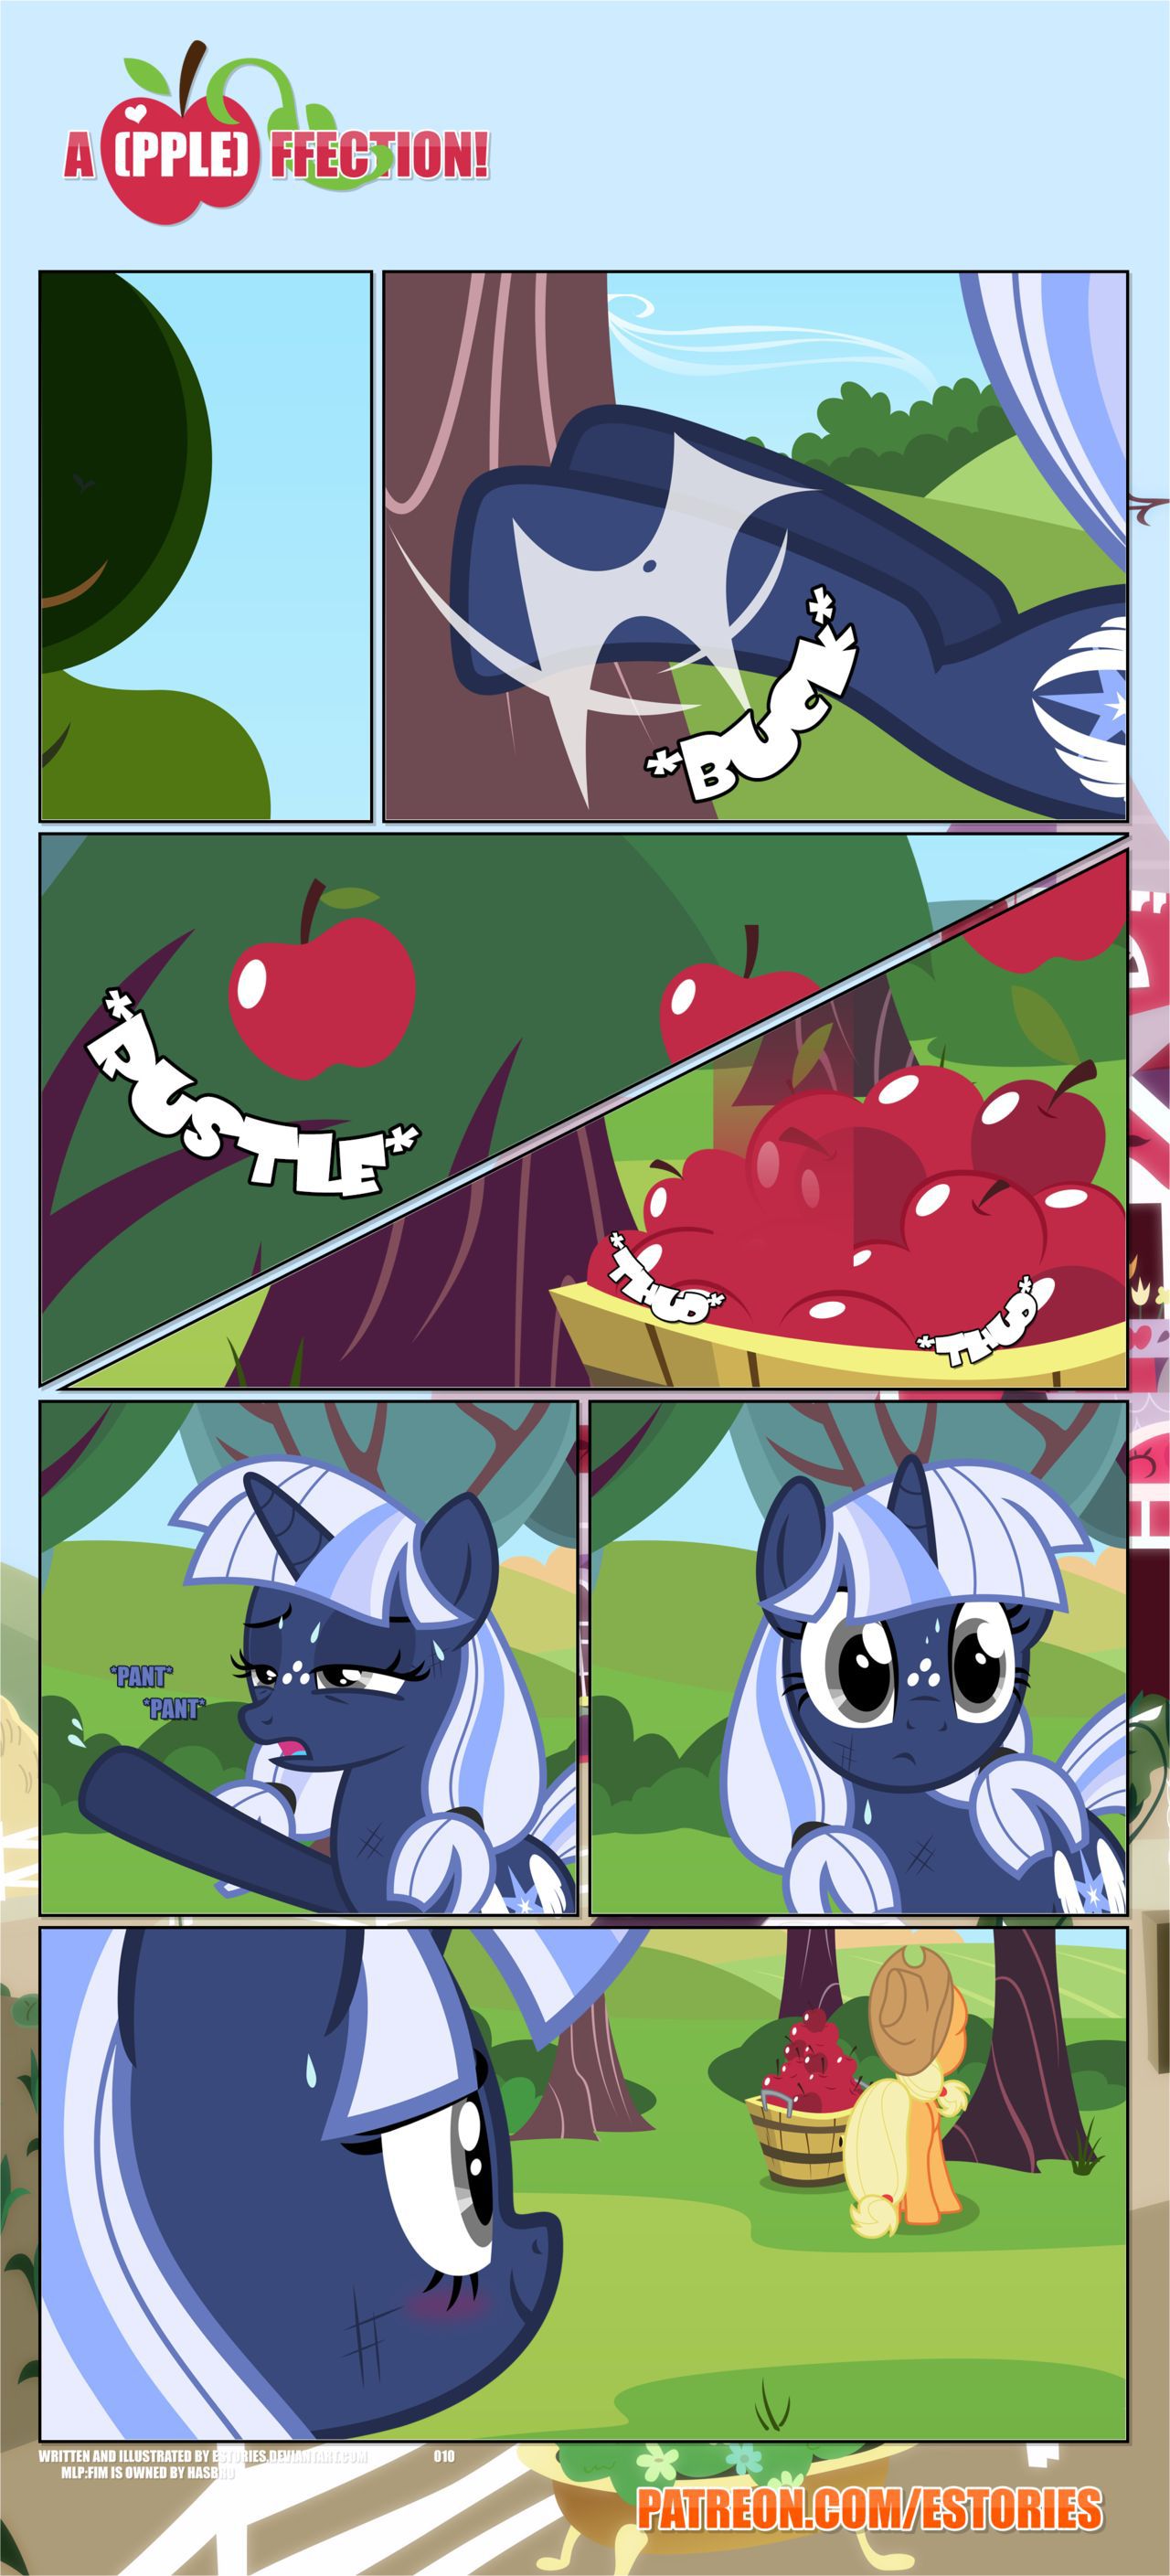 [EStories] Appleffection (My Little Pony Friendship is Magic) [Ongoing] 10